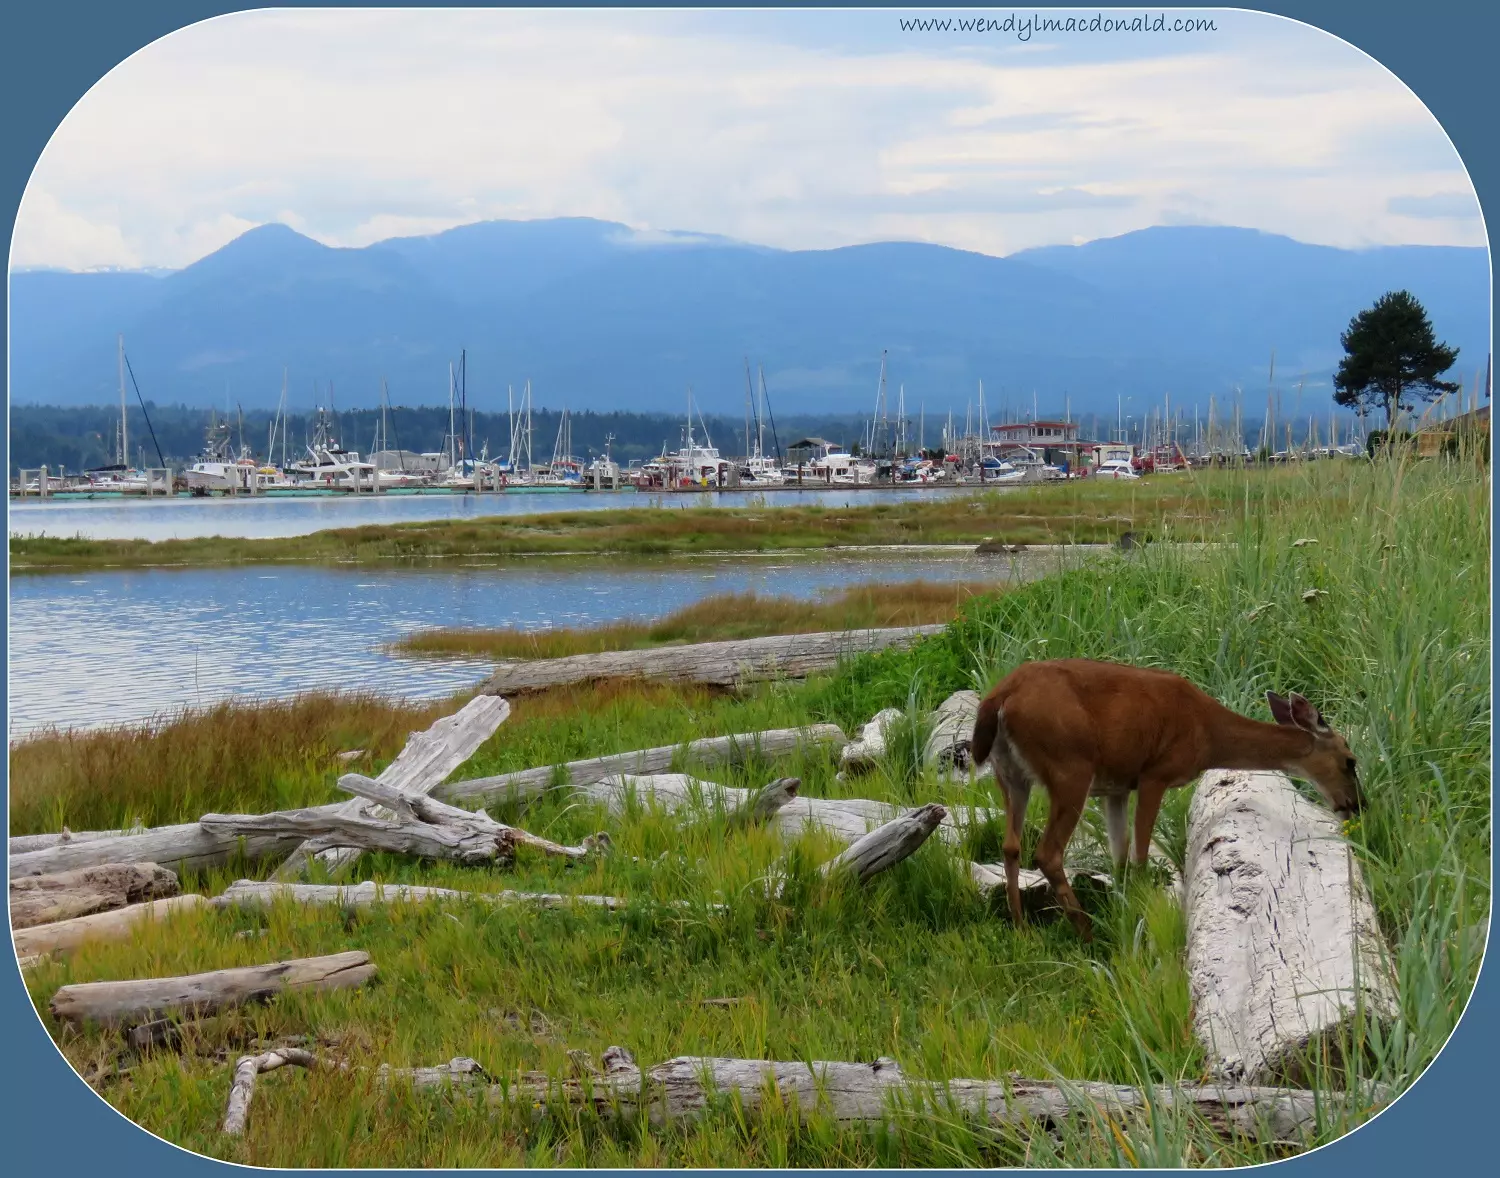 Deer near an inlet with boat and mountains behind, photo credit: Wendy MacDonald